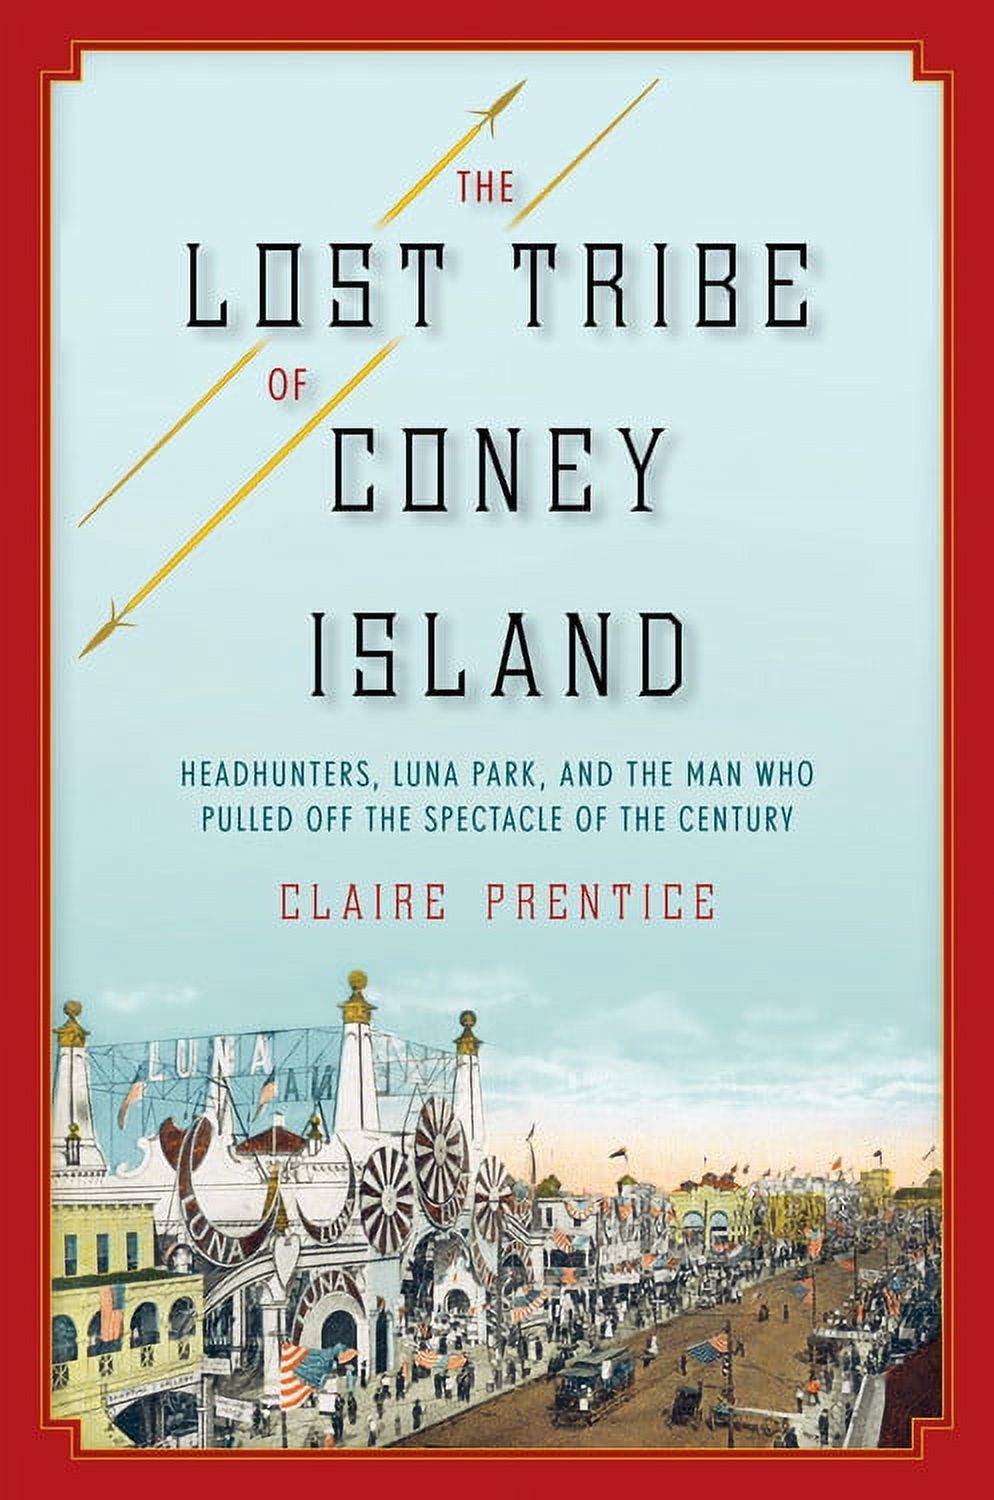 The Lost Tribe of Coney Island : Headhunters, Luna Park, and the Man Who Pulled Off the Spectacle of the Century (Hardcover) - image 1 of 1